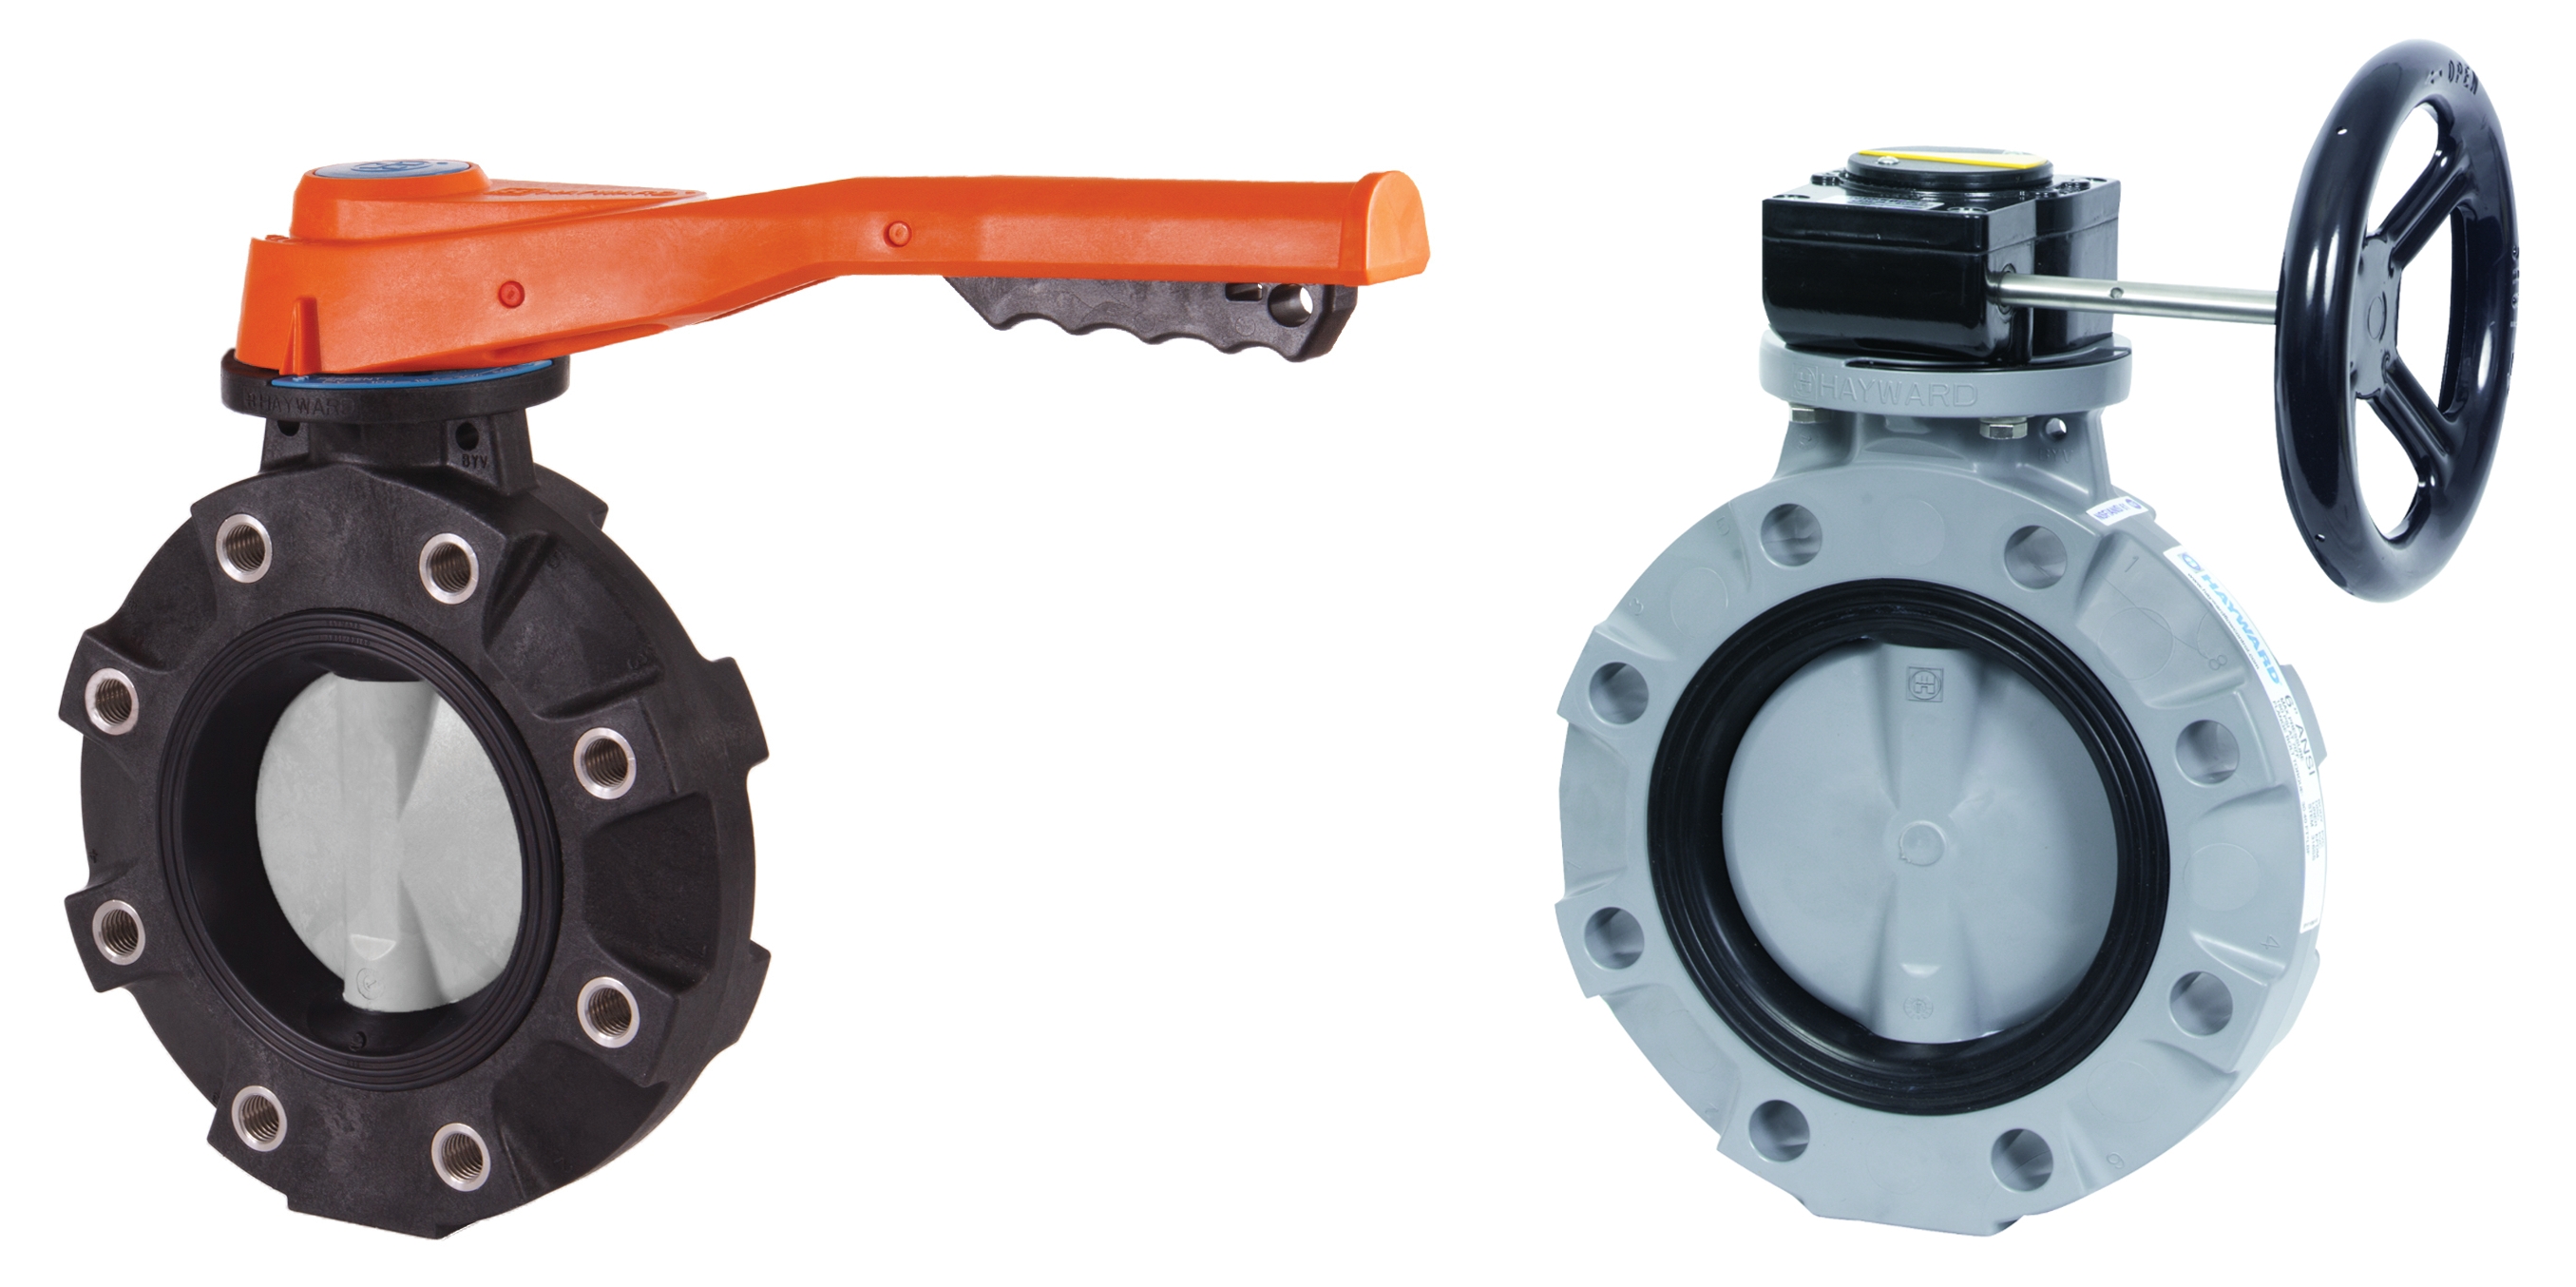 Hayward’s BYV Valve: The Industry’s Most Advanced Thermoplastic Design